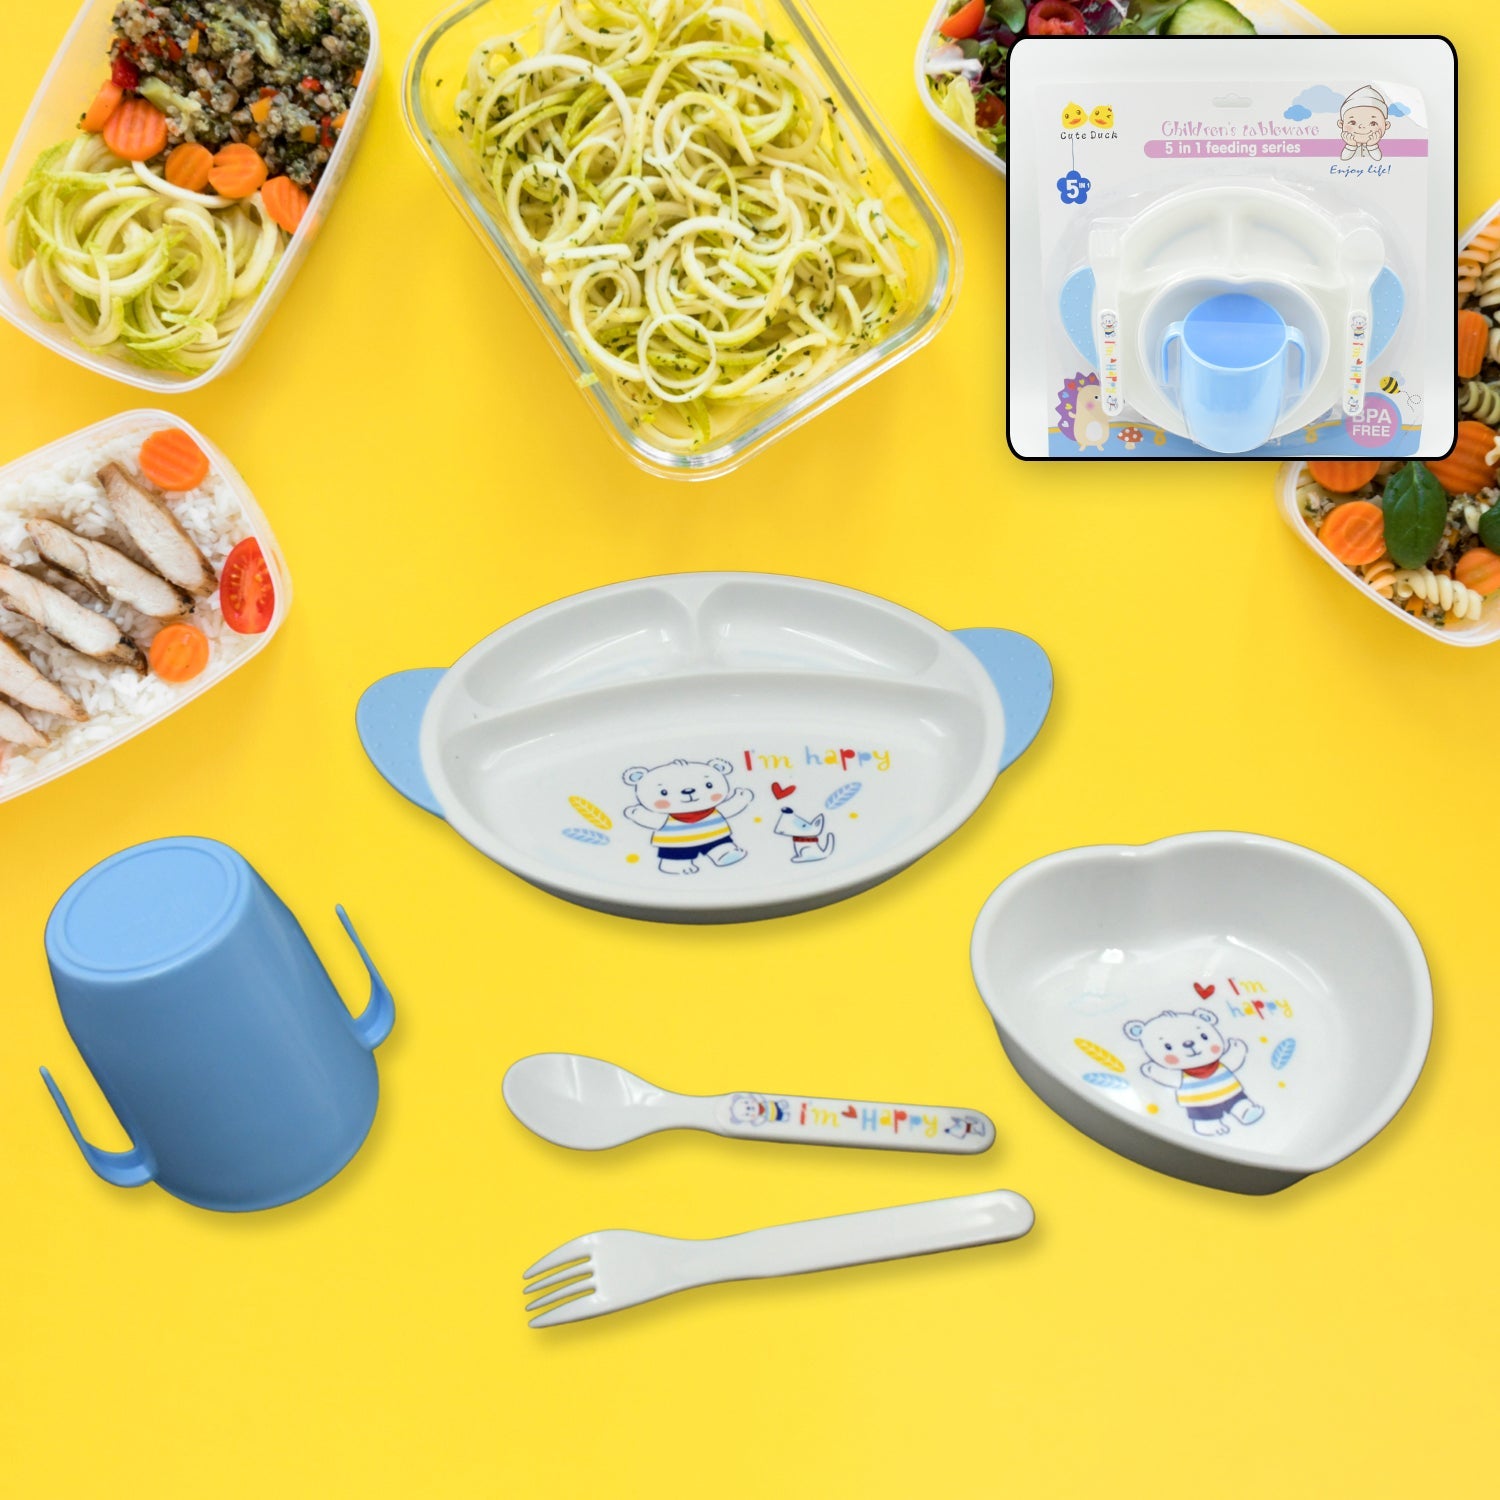 8176 5in1 Baby Feeding Set for Kids and Toddlers,Children Children Dinnerware Set - Feeding Set for Kids, Cartoon Design Plate, Cup, Spoon, Fork  Tableware Cutlery for Kids Microwave & Dishwasher Safe (5 Pcs Set)